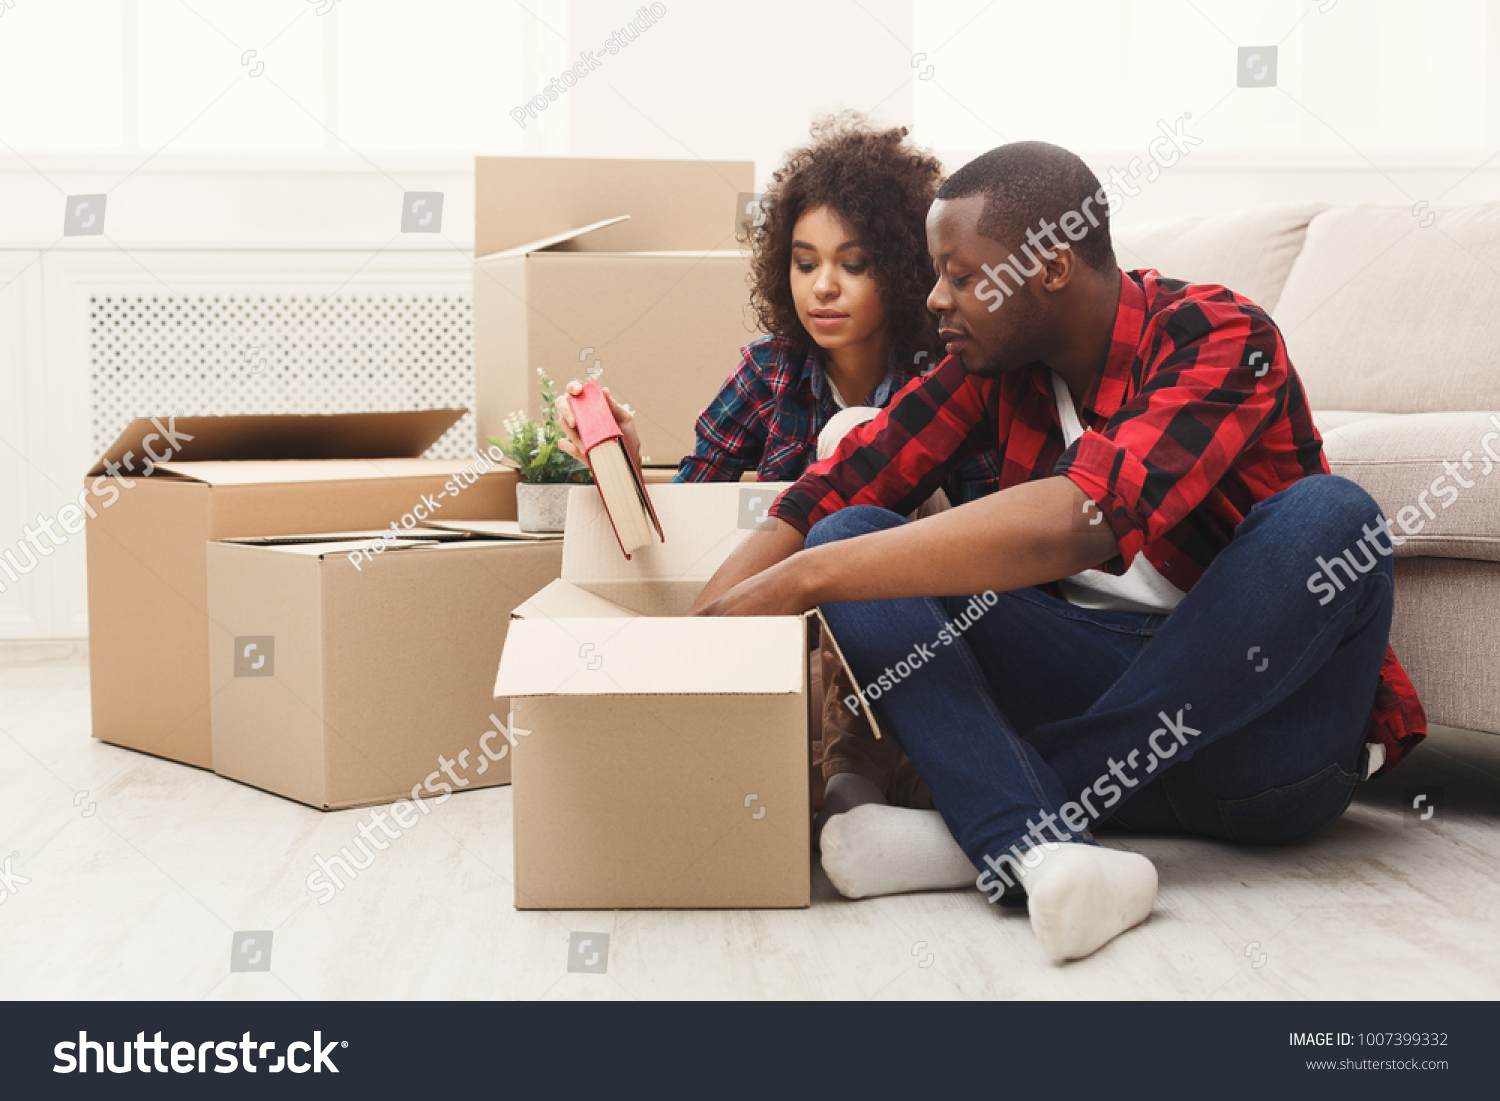 Happy african-american couple unpacking moving boxes and taking out books in new apartment, copy space #1007399332